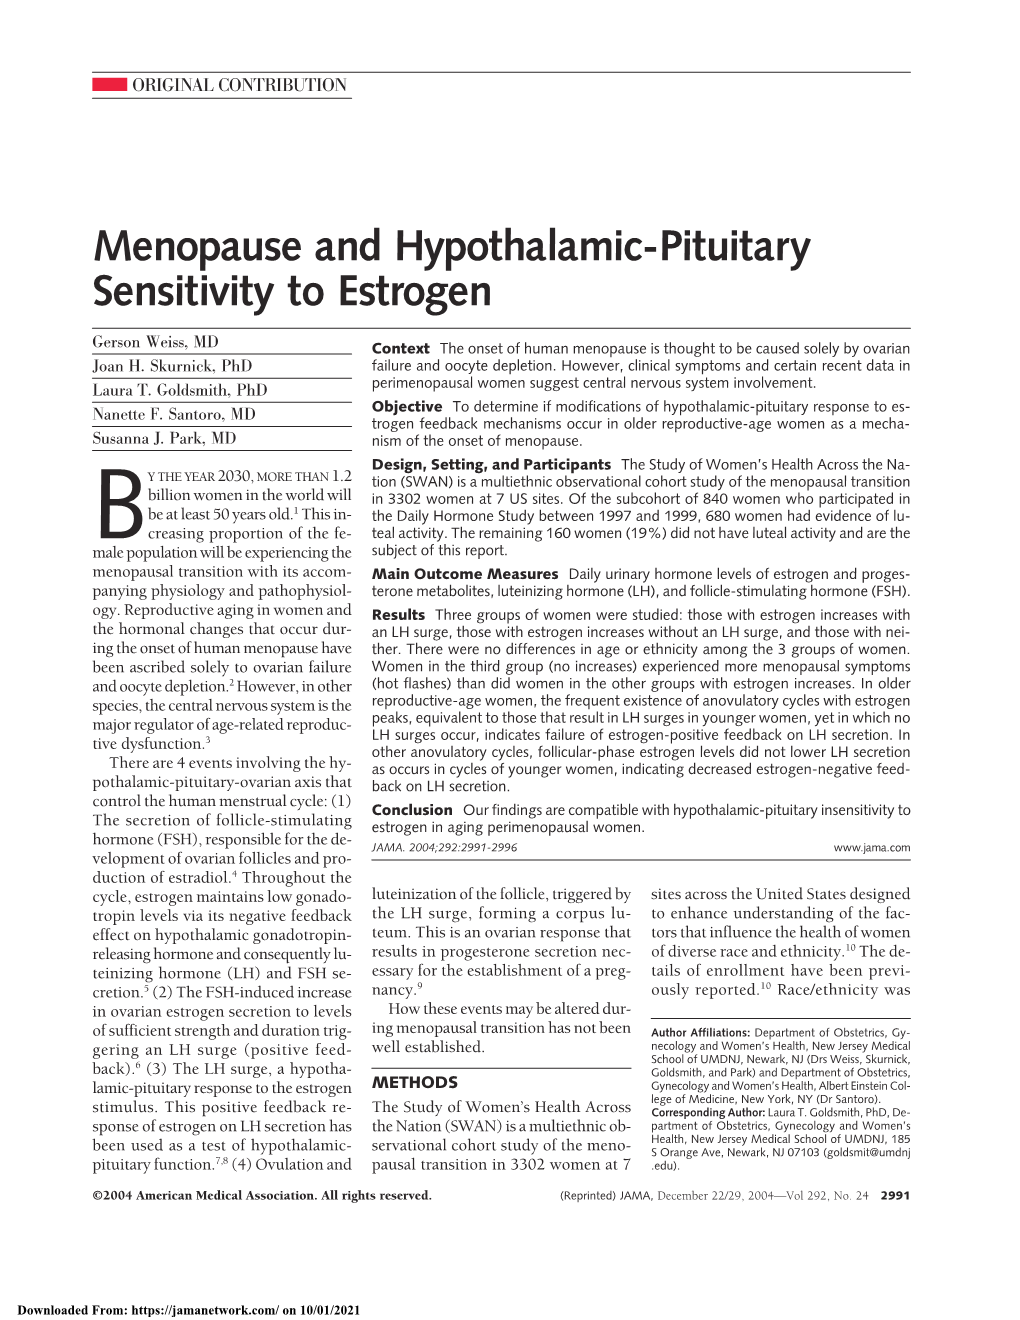 Menopause and Hypothalamic-Pituitary Sensitivity to Estrogen